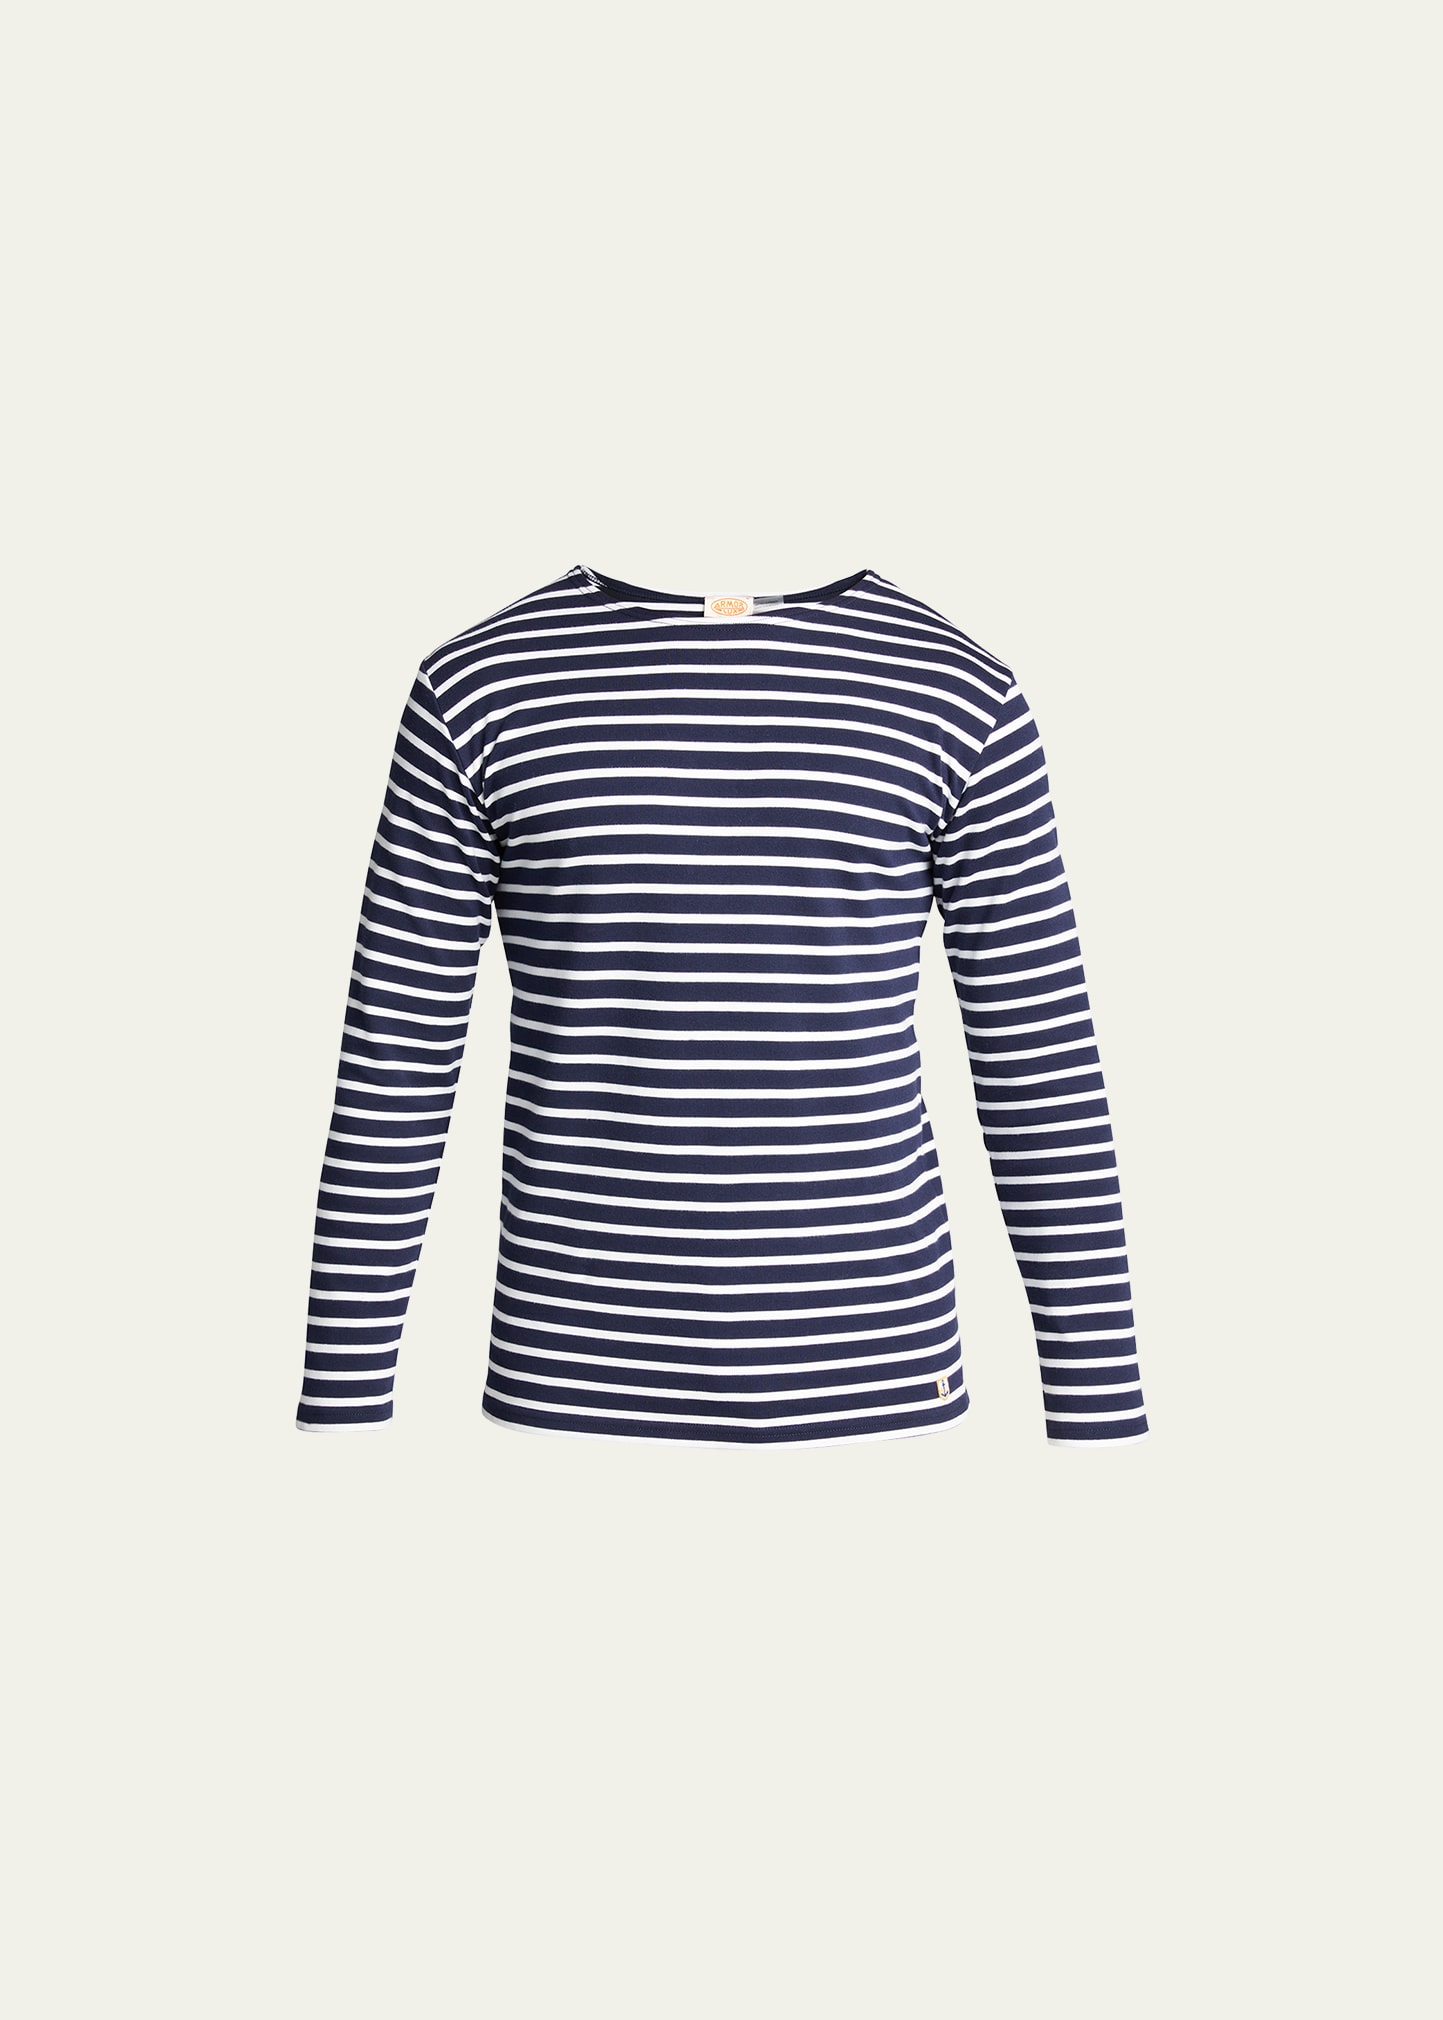 Armor-lux Men's Striped Jersey T-shirt In Navire Blanc